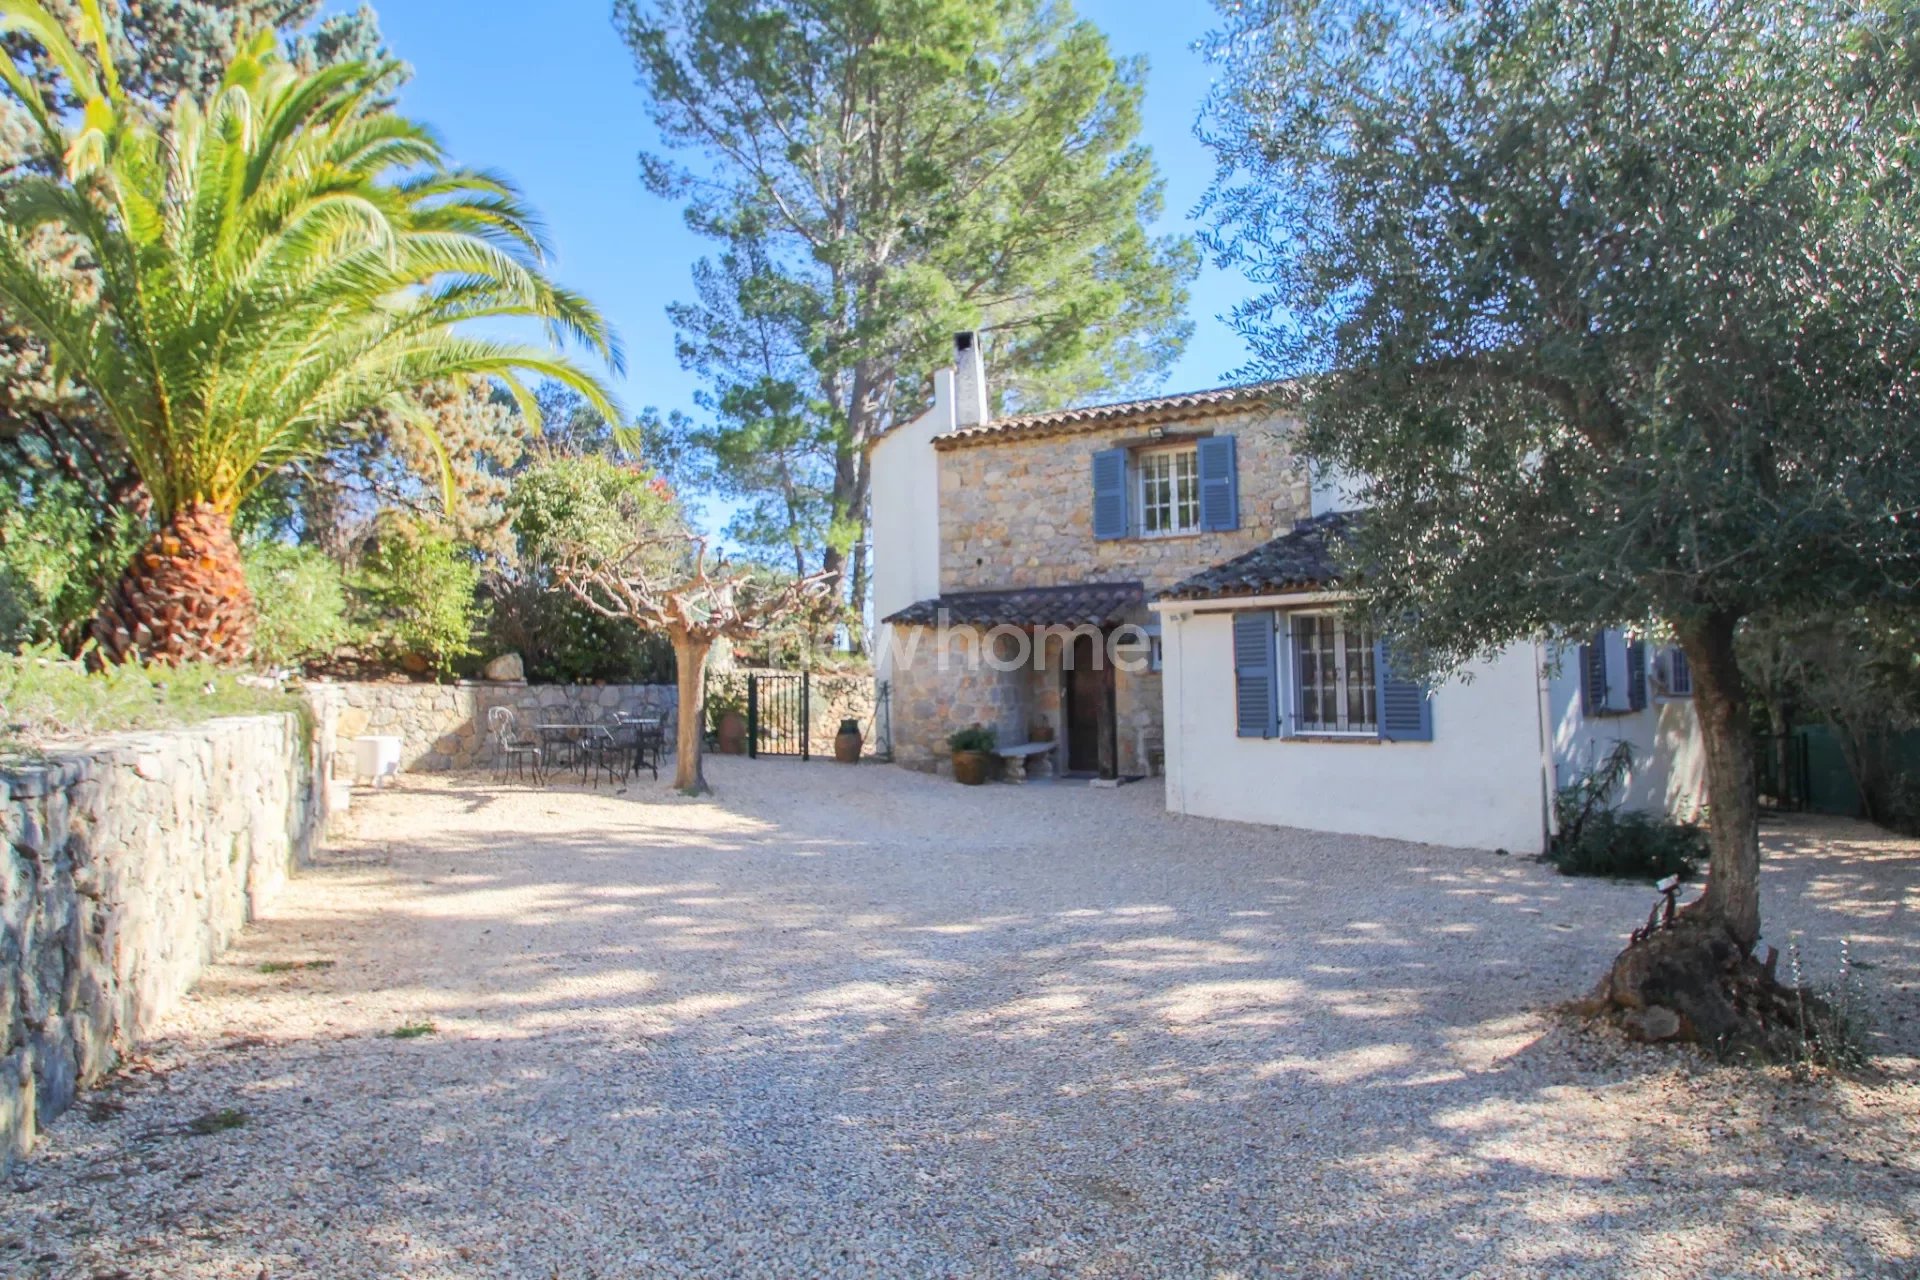 Charming Provençal house with stunning views.